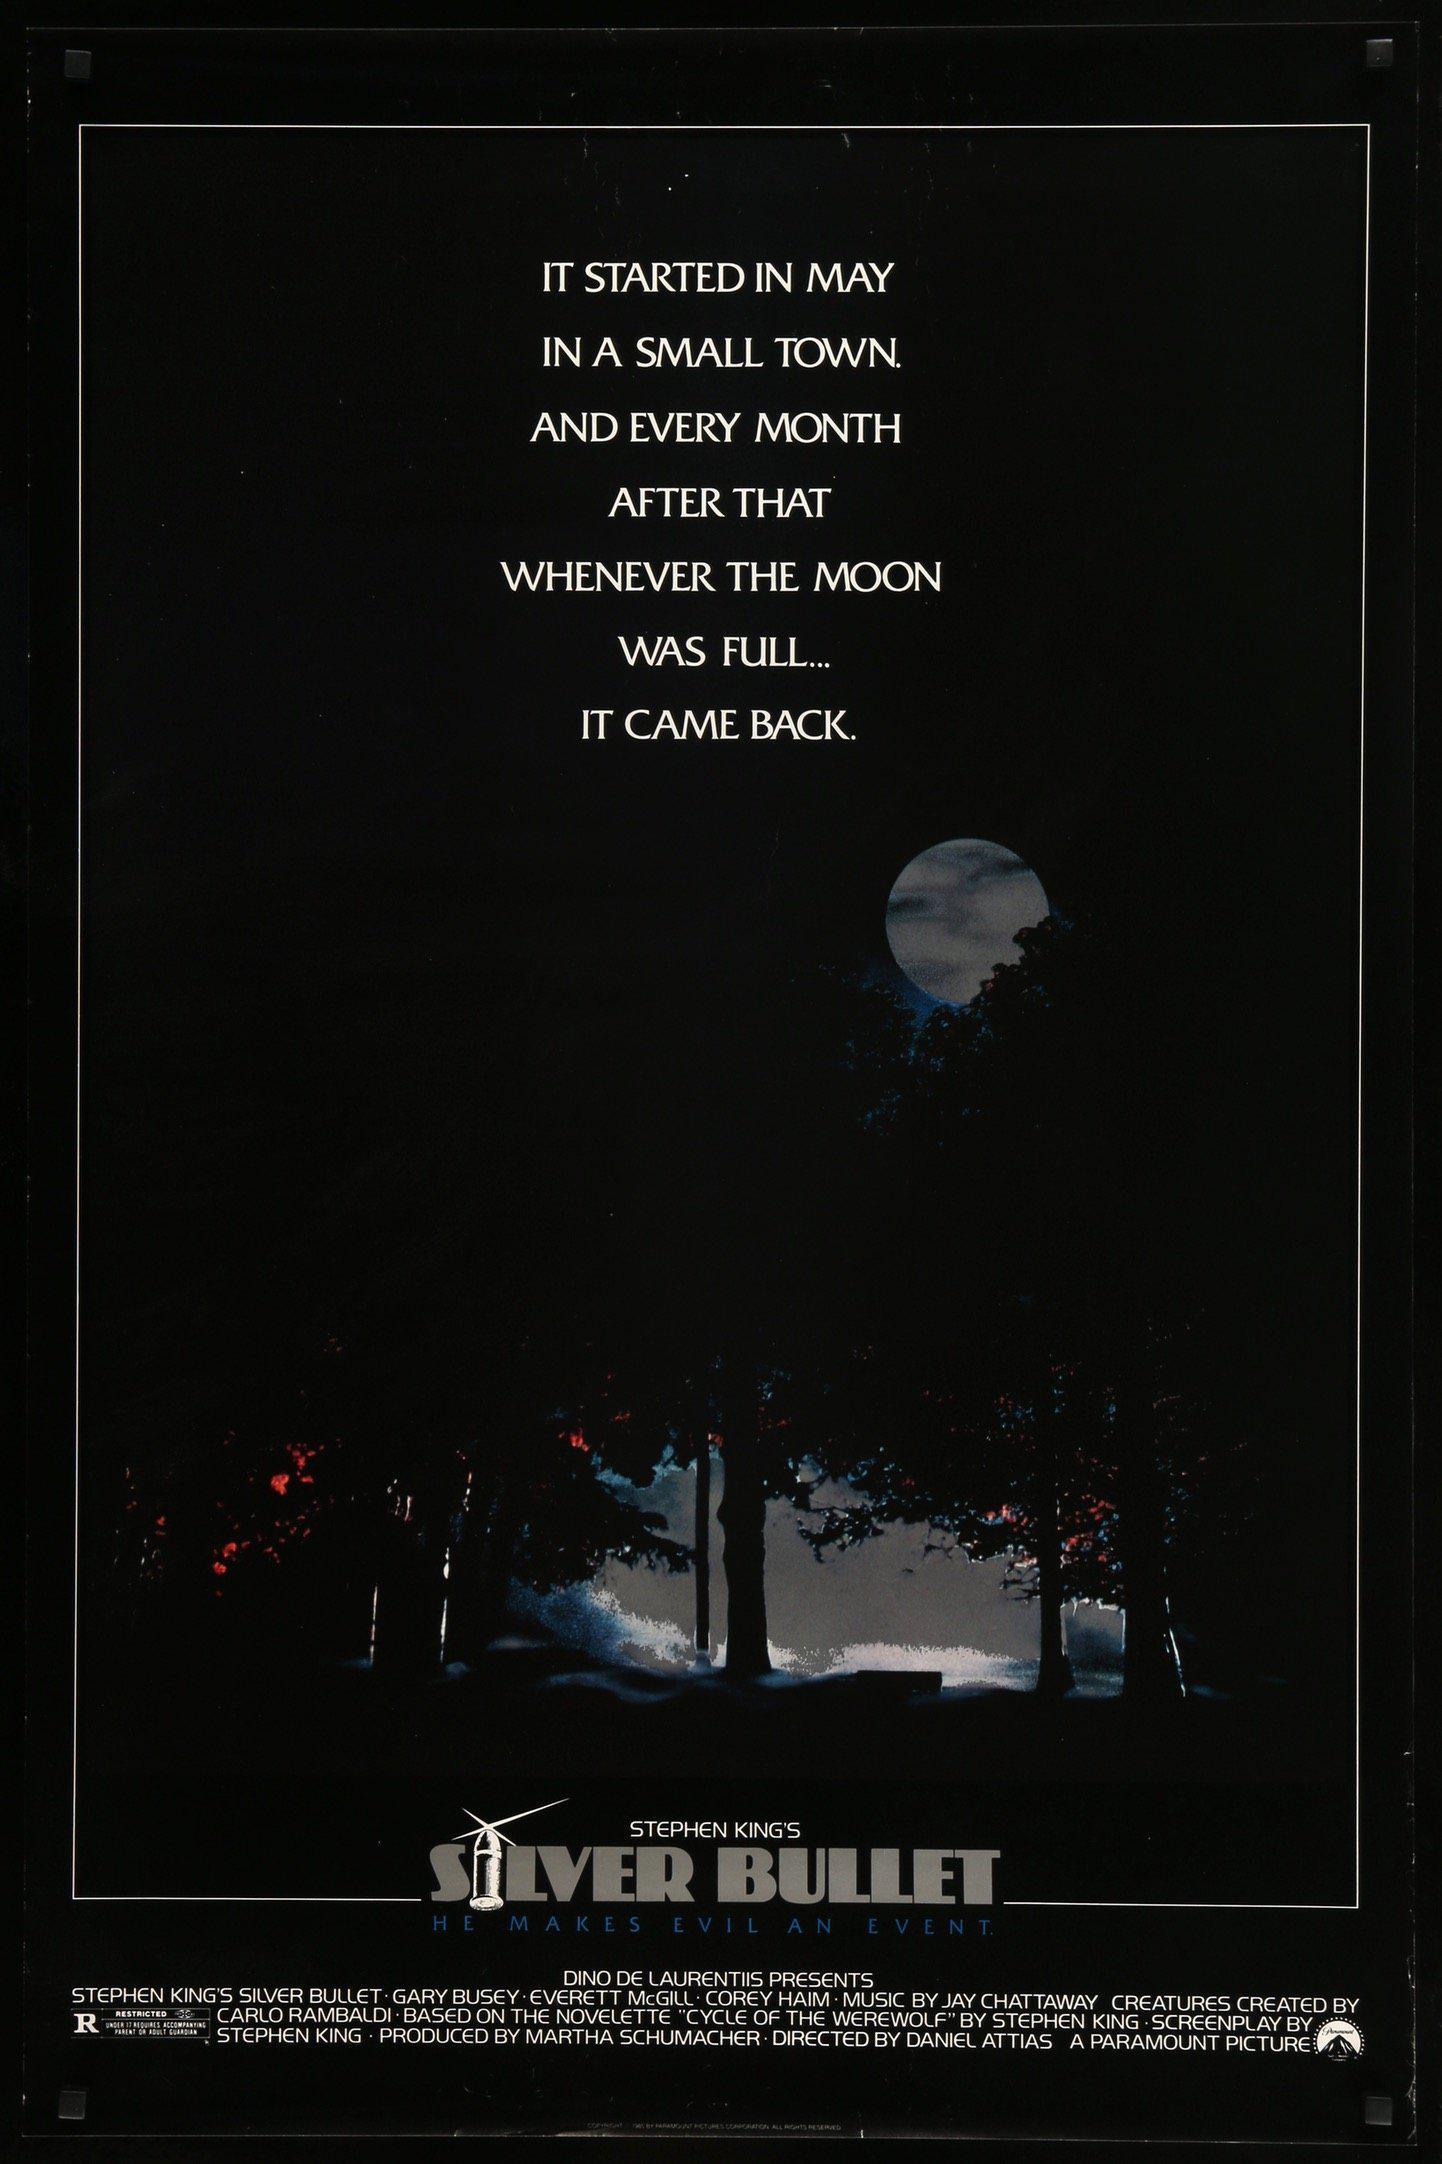 Silver Bullet film poster, it shows a vague wooded area with a full moon shining through the trees